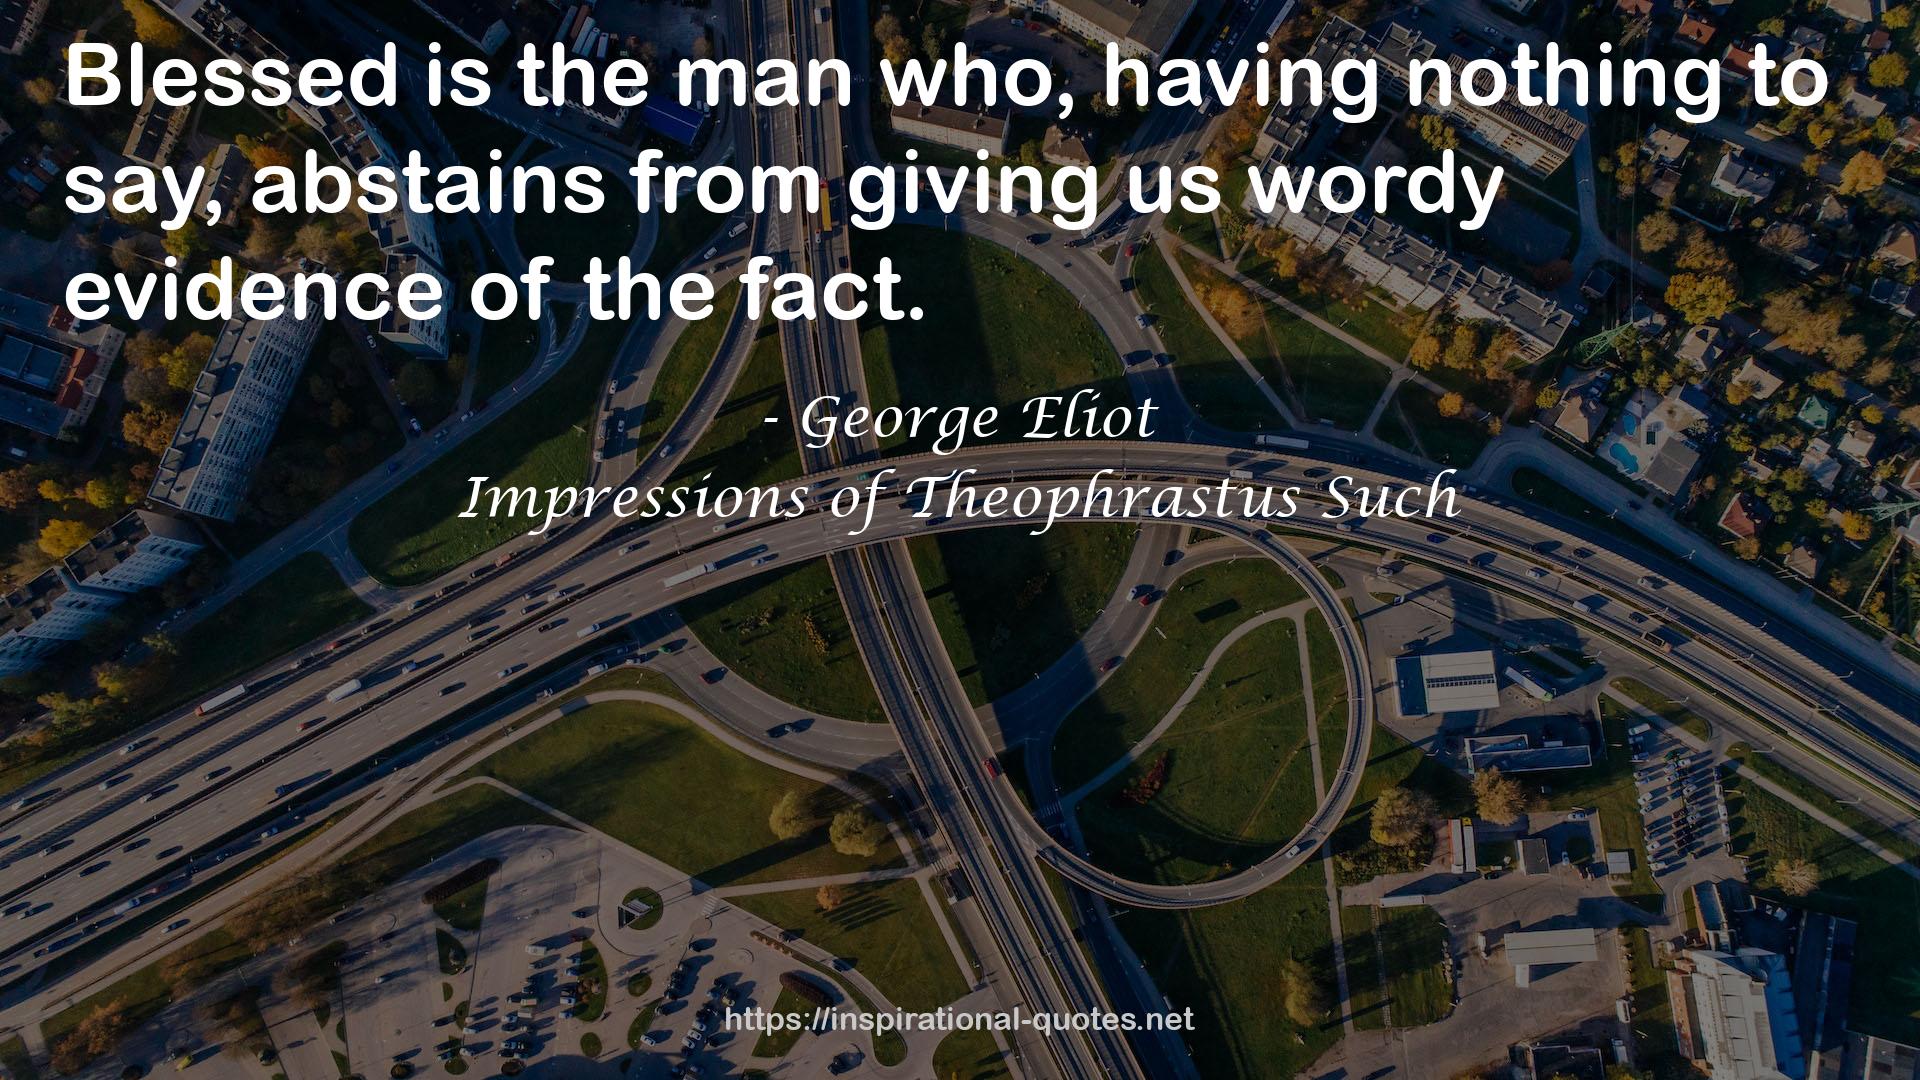 Impressions of Theophrastus Such QUOTES